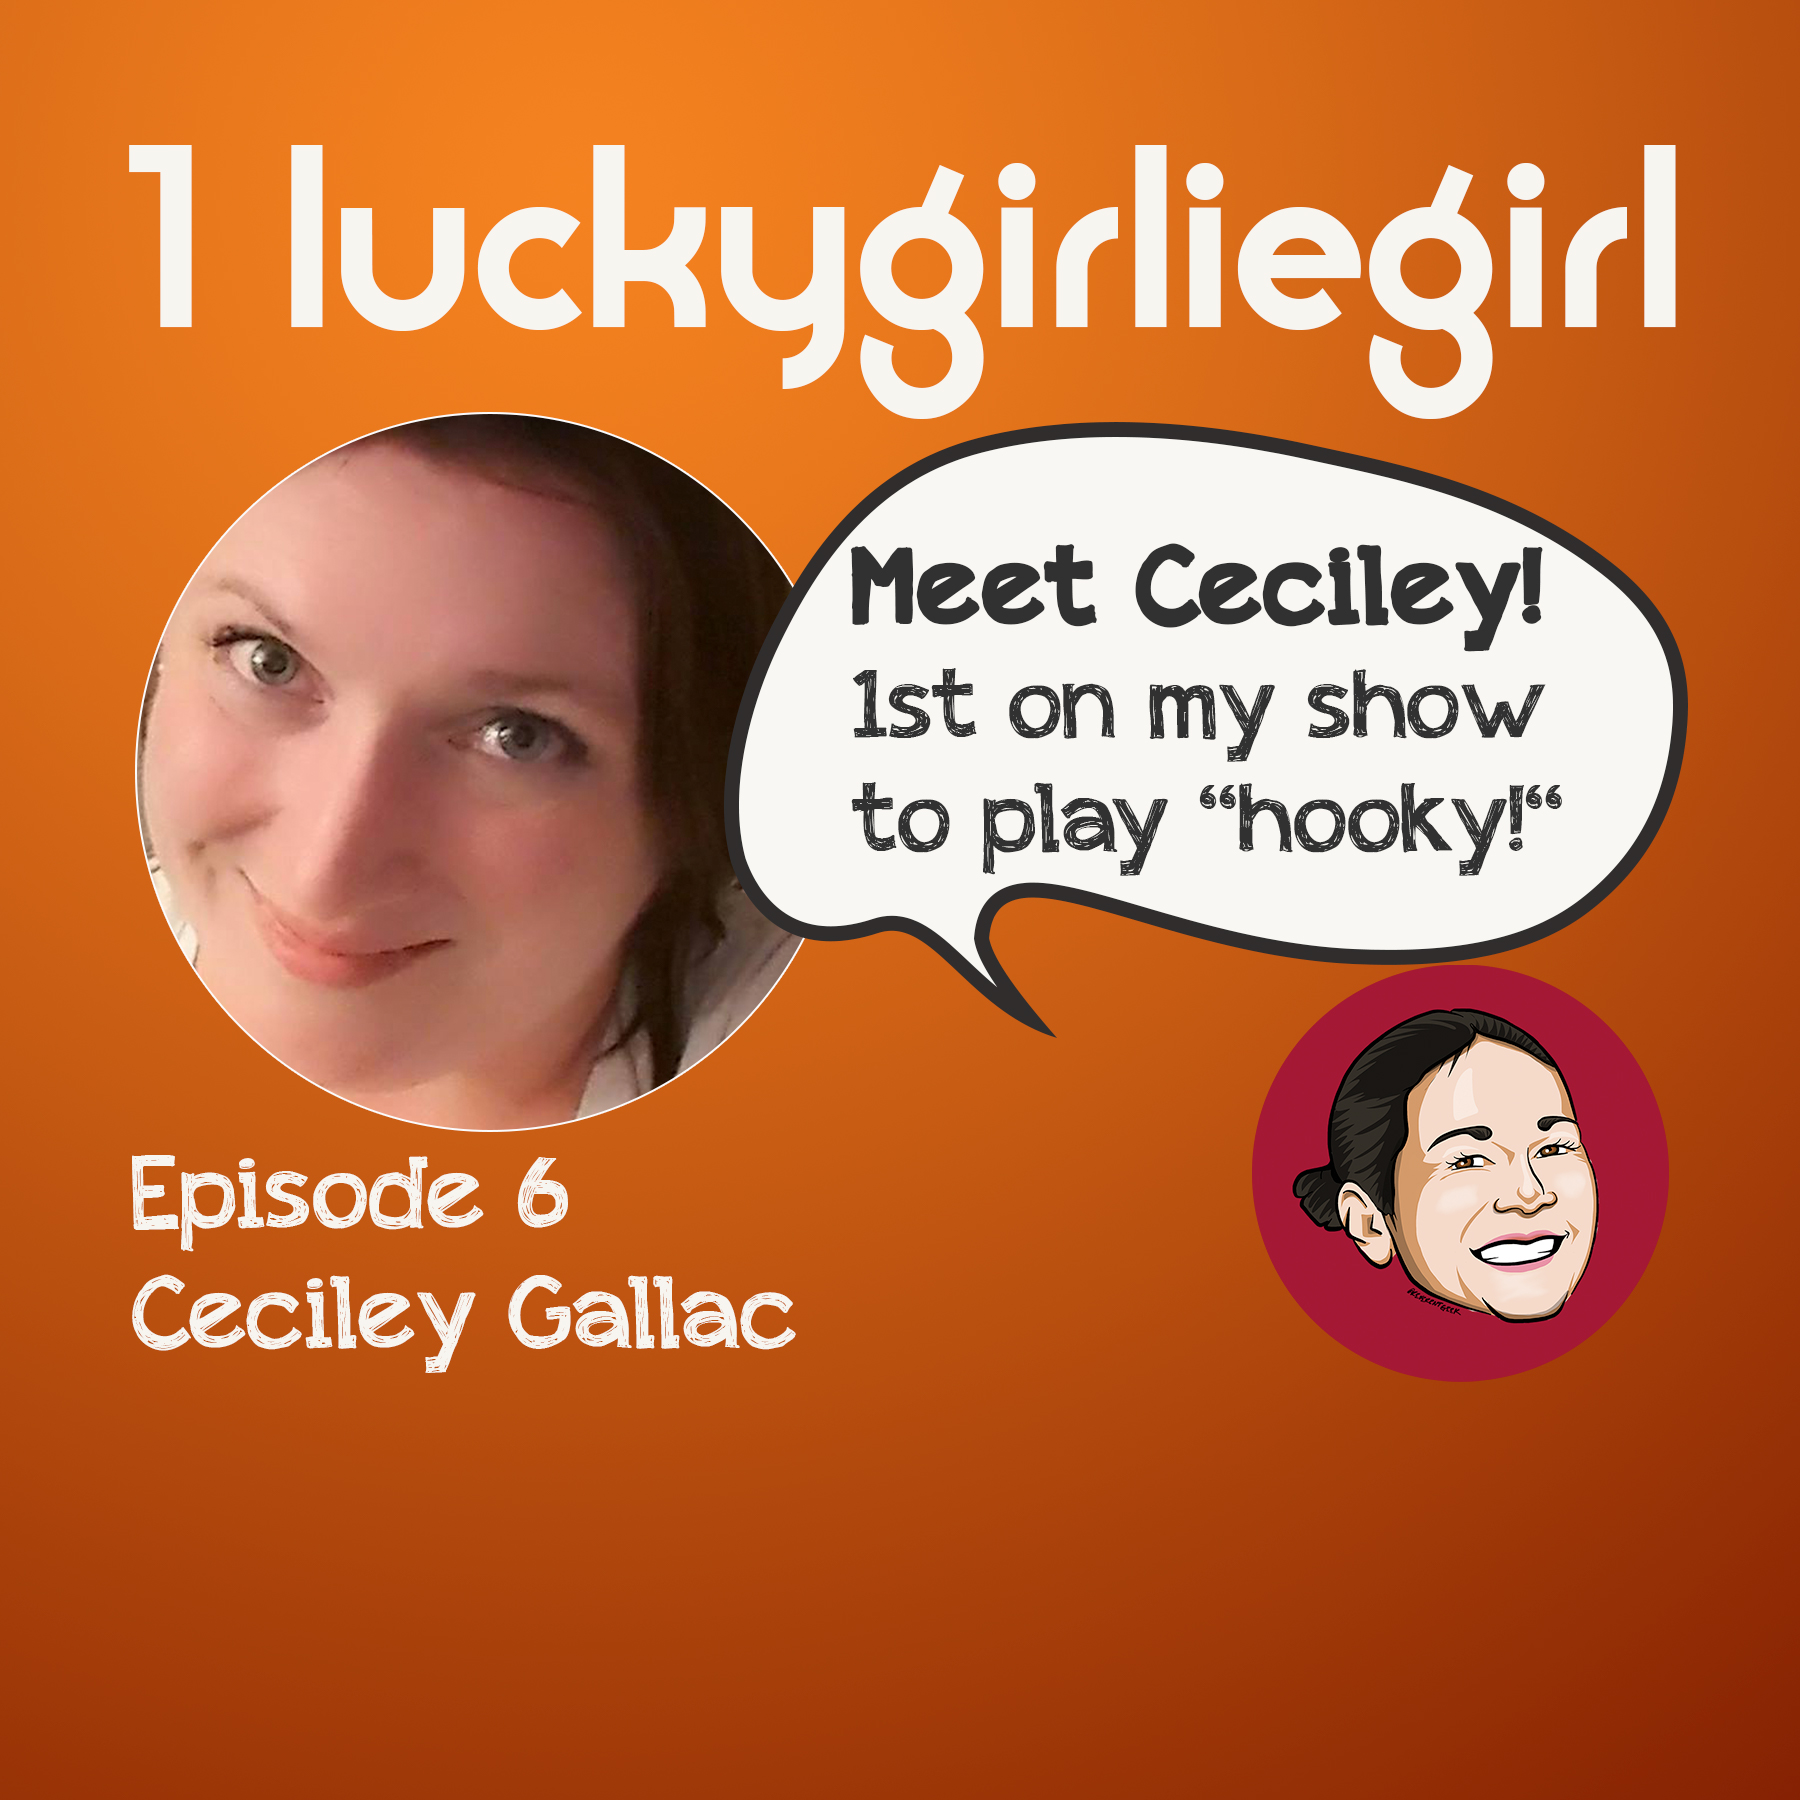 06 – Ceciley Gallac “Playing hooky on my show”